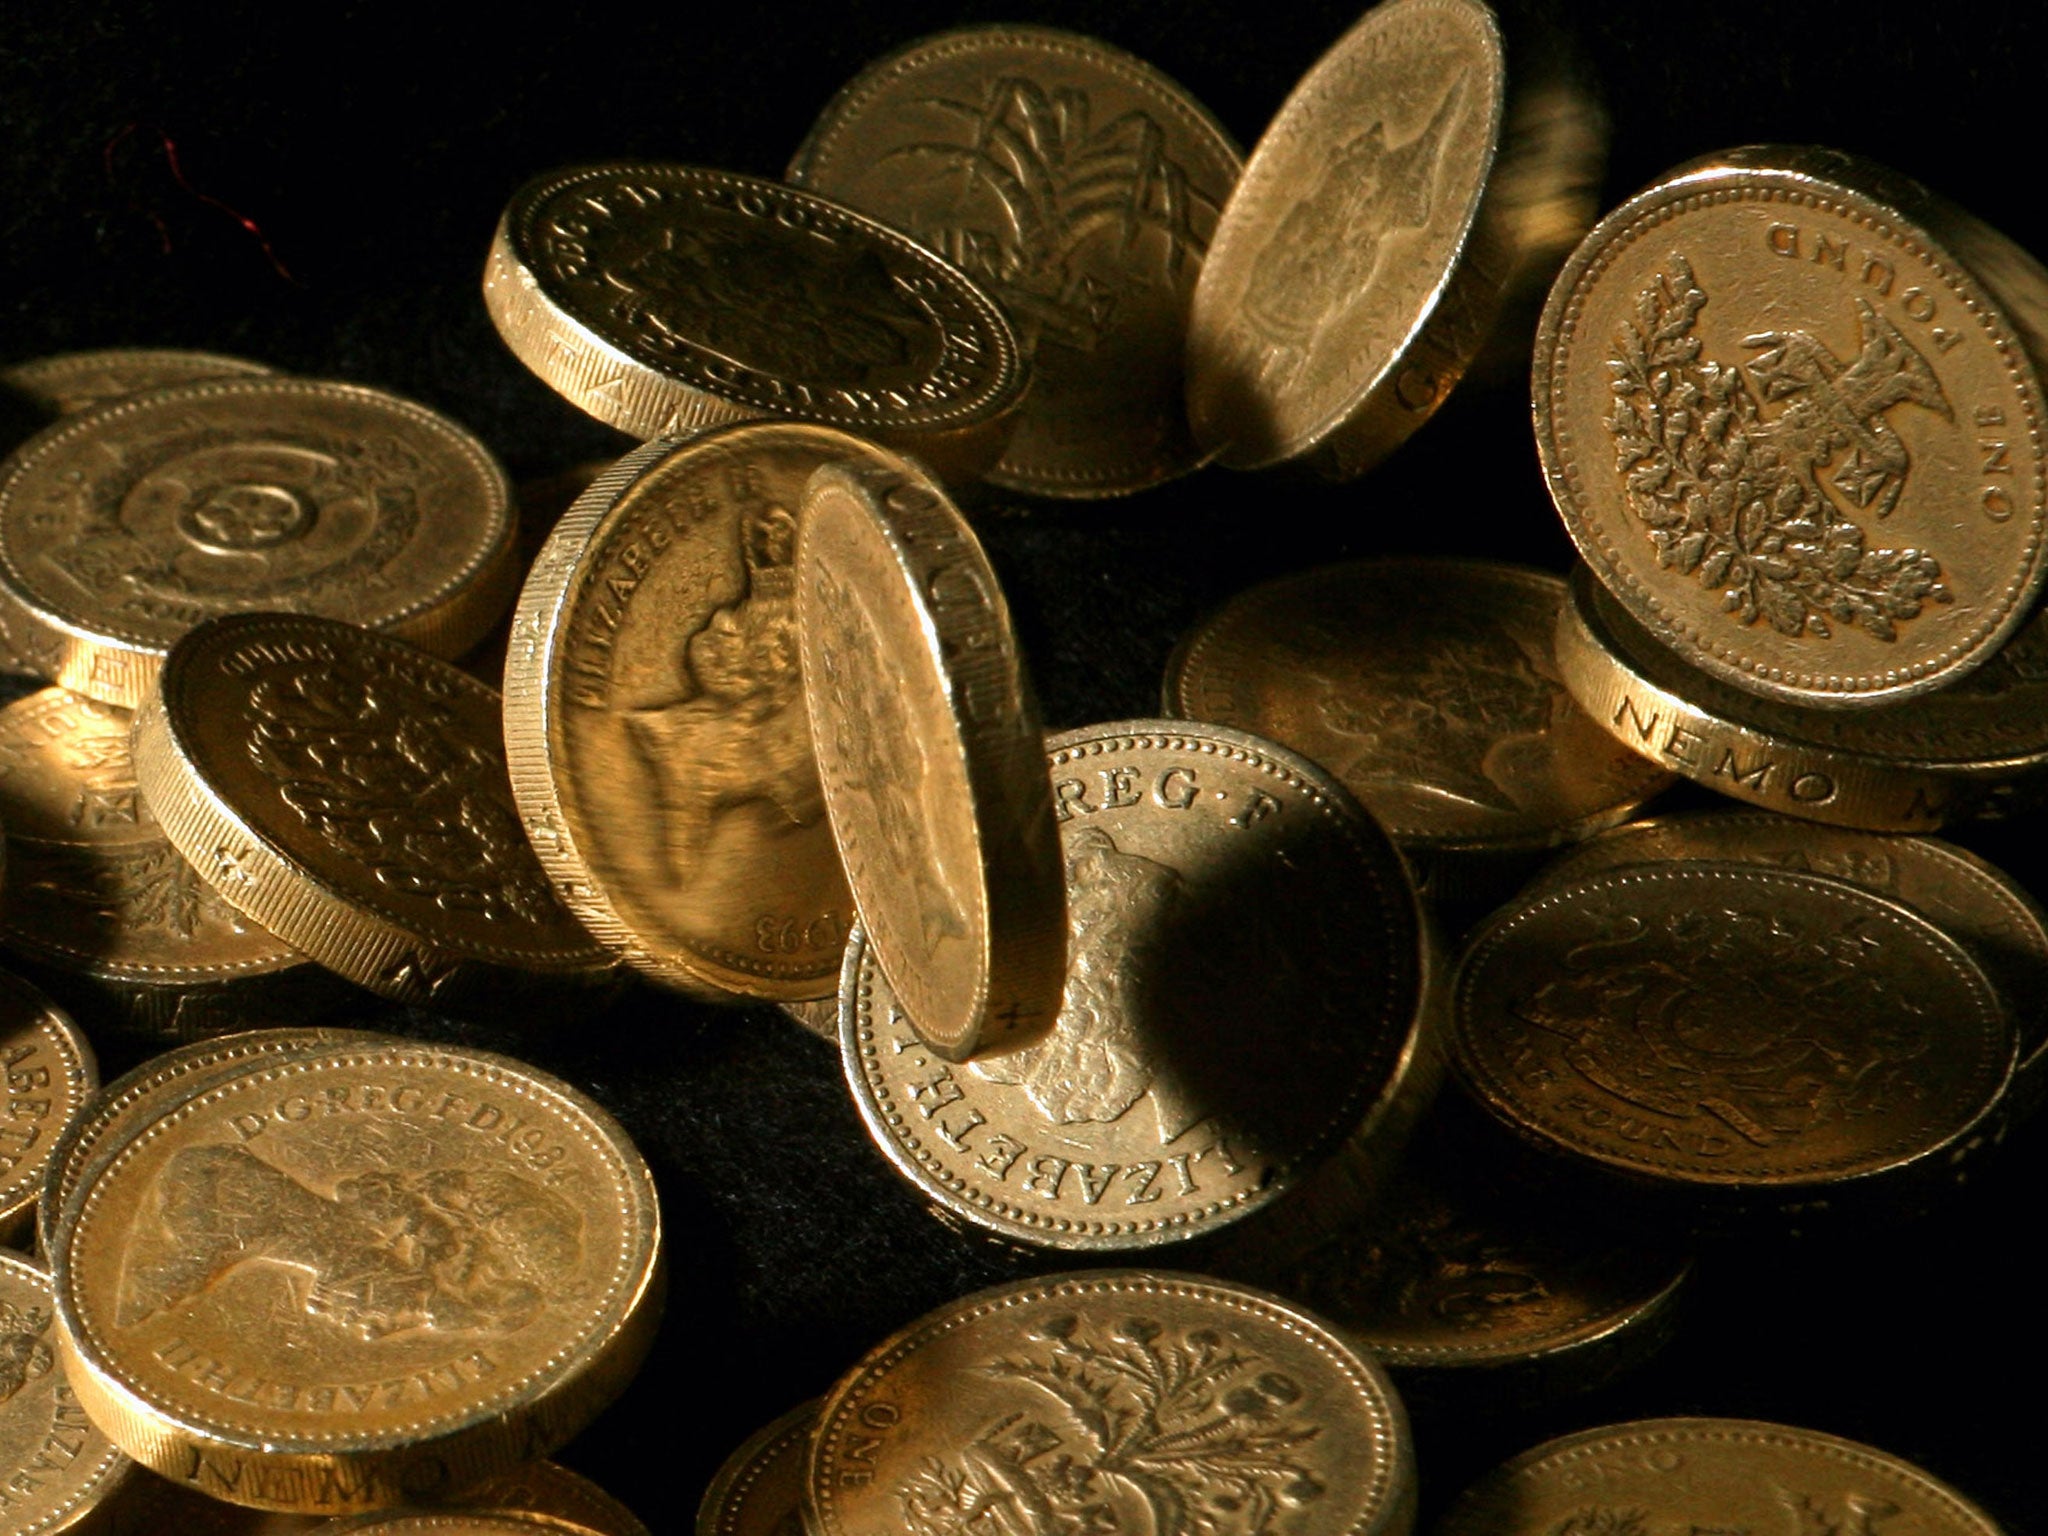 A question relating to fair and unfair coins was put to one prospective employee